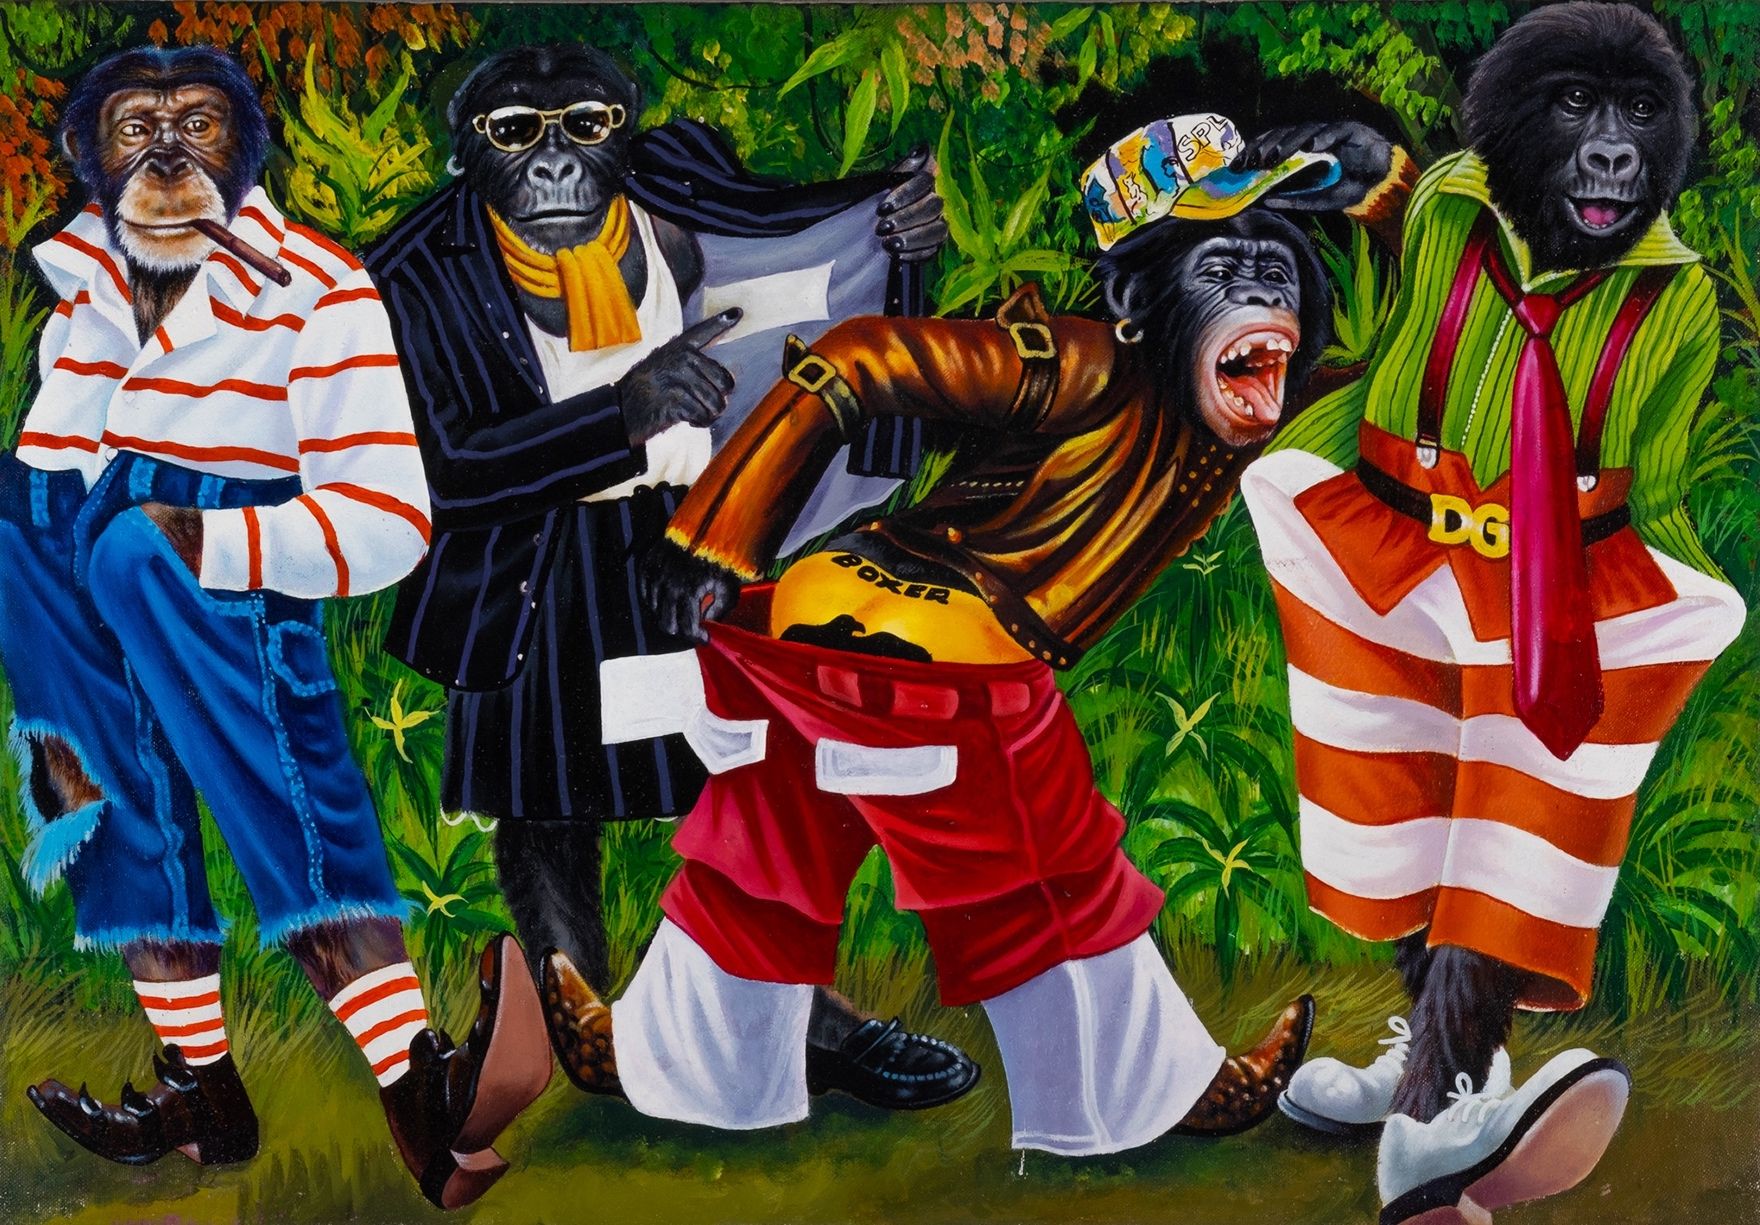 JP Mika (Kinshasa, 1980. Lives and works in Kinshasa, DRC) Painting acrylic on c&hellip;